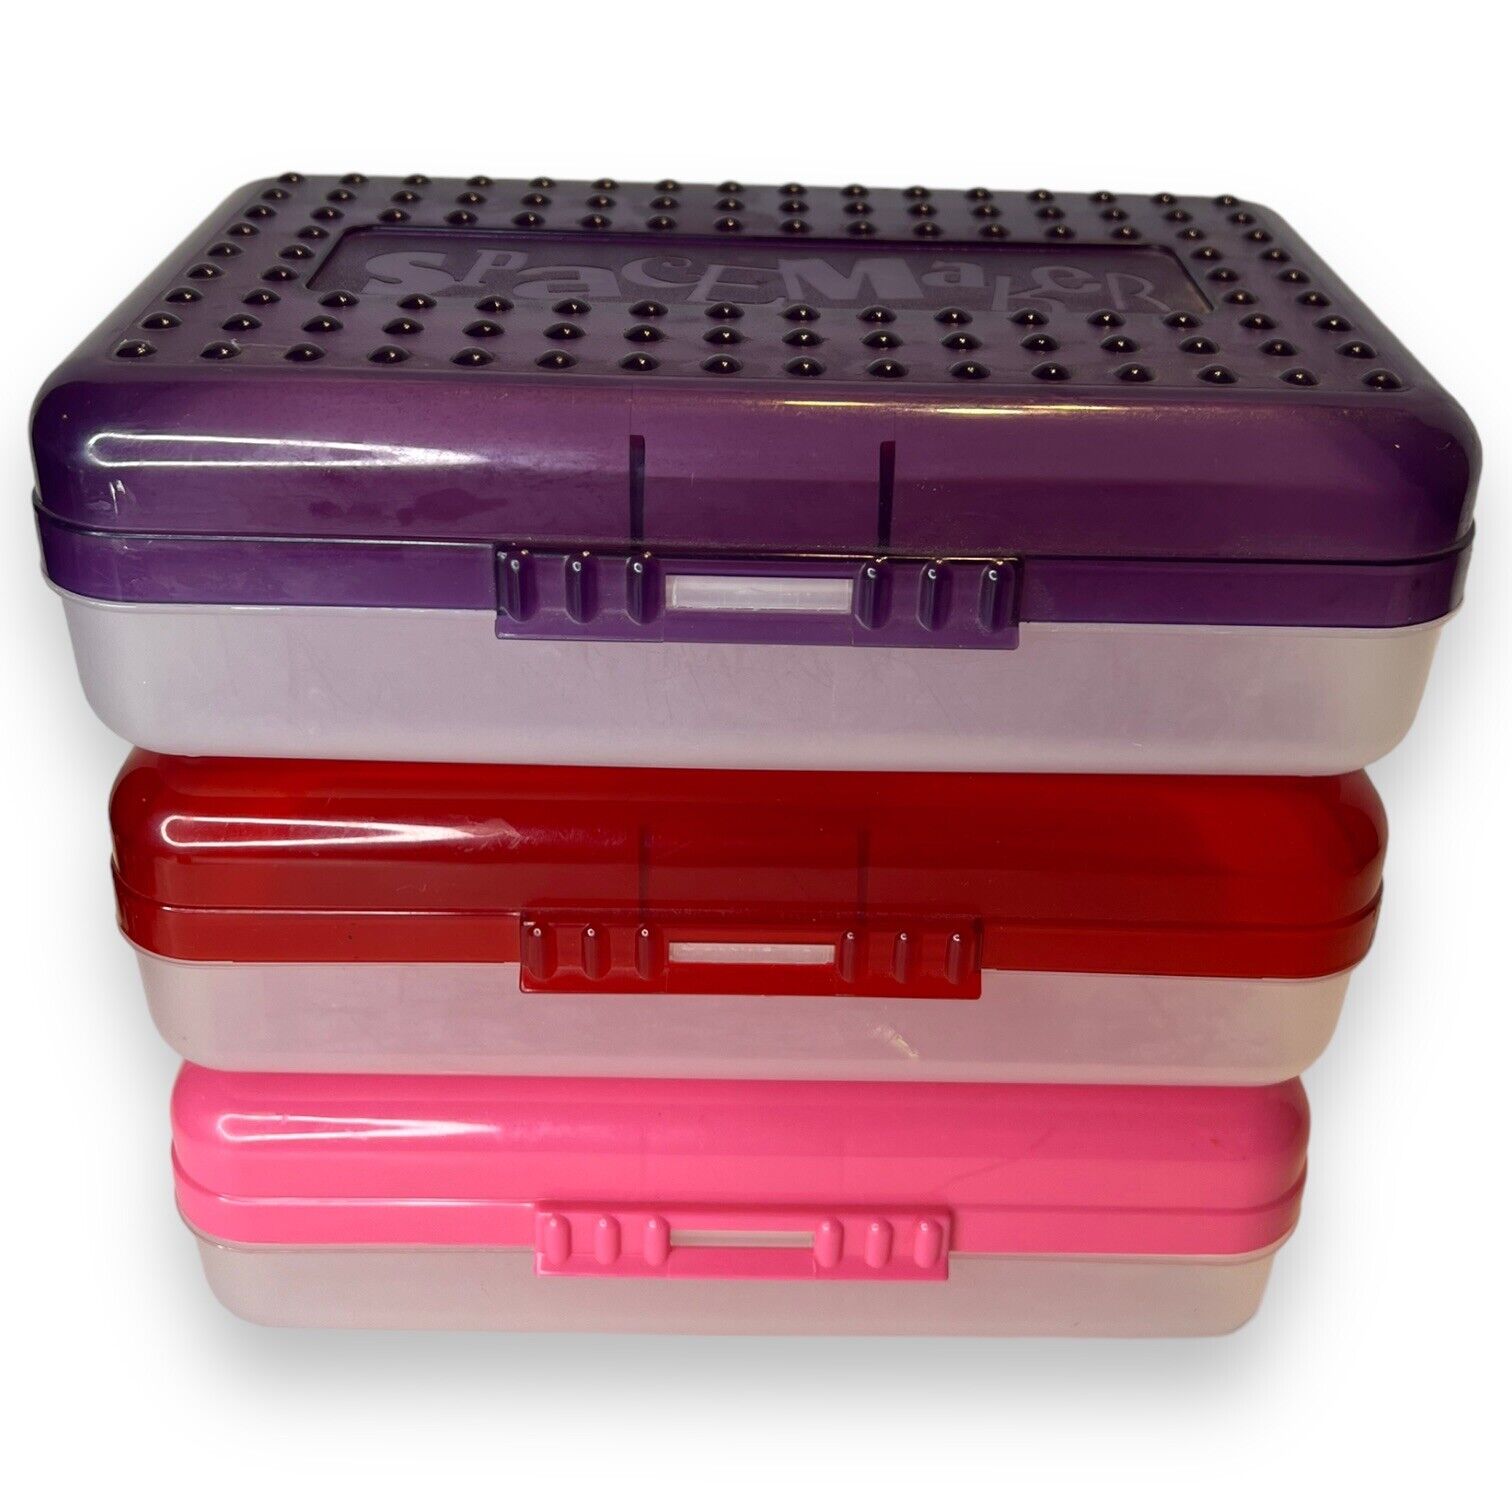 Vtg Spacemaker Pencil Box Lot Of 3  Purple Red Pink w/ Clear Bottoms